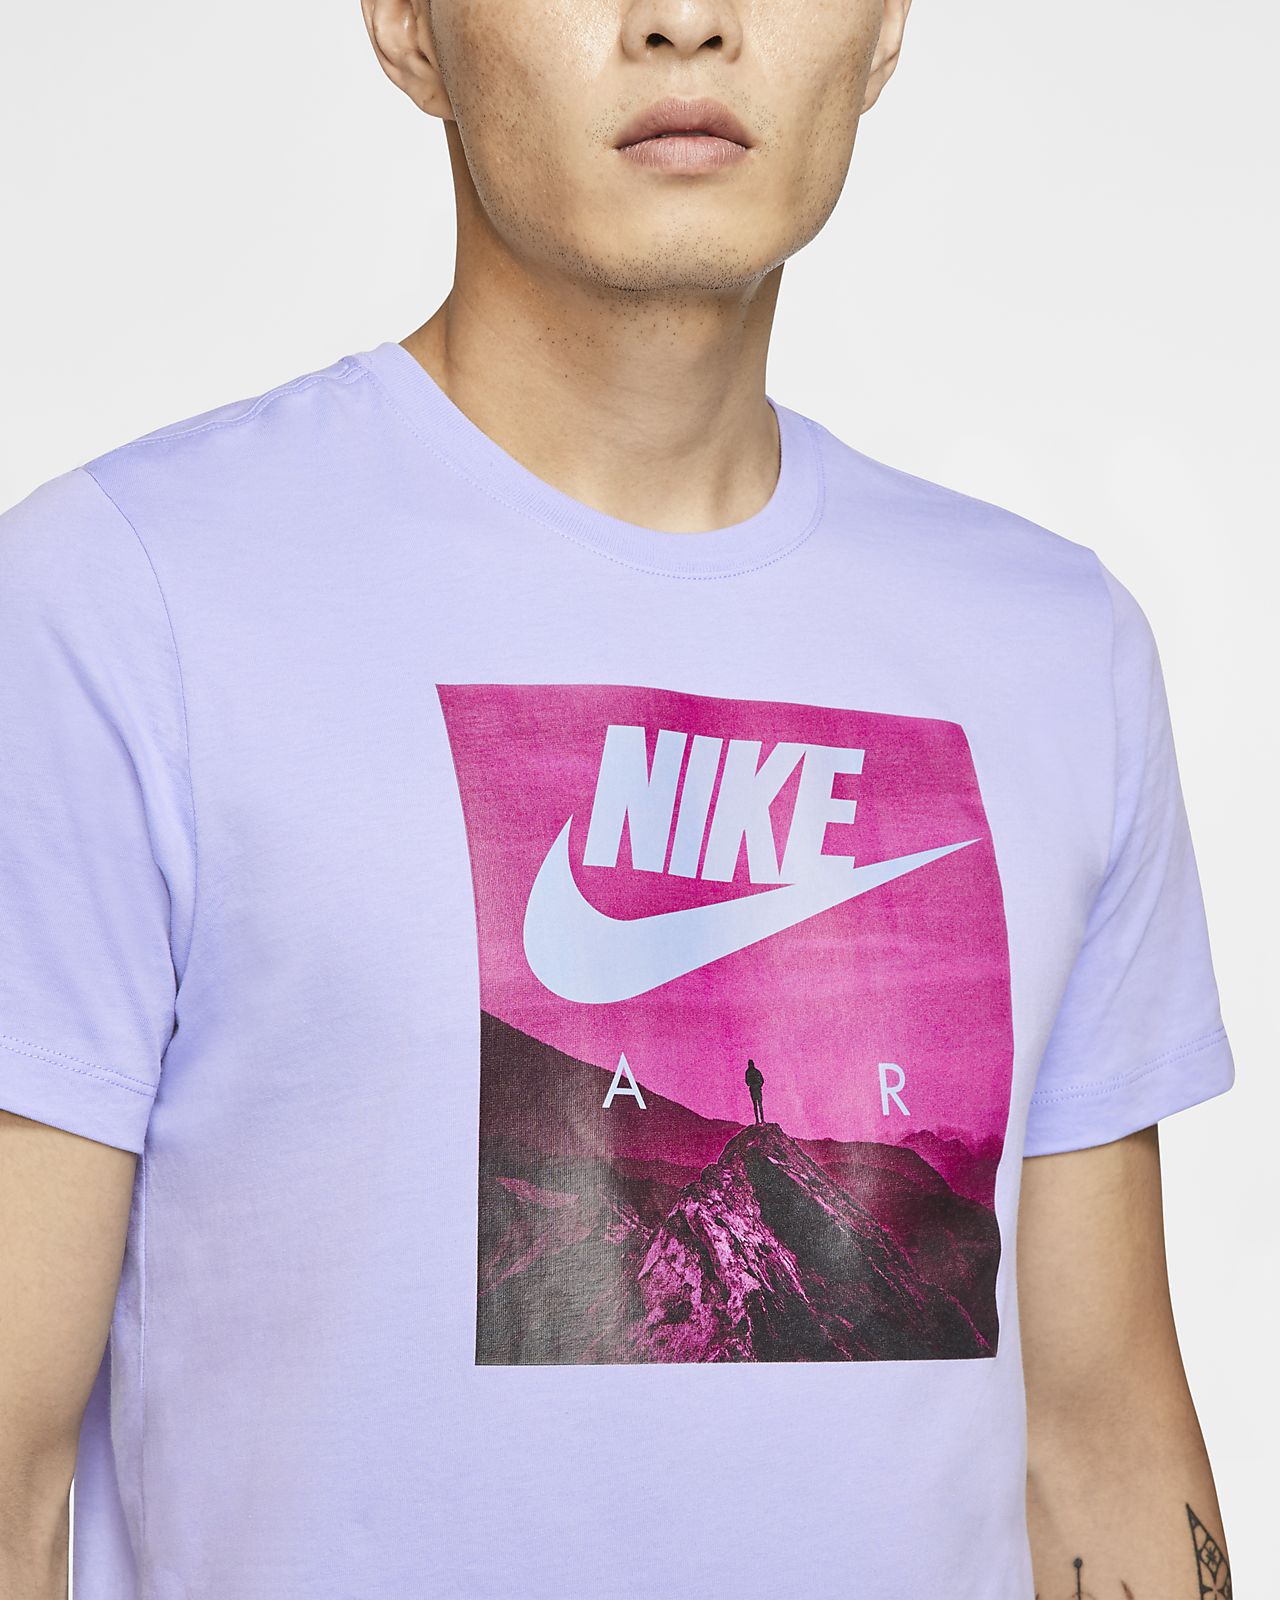 nike shirt pink and blue